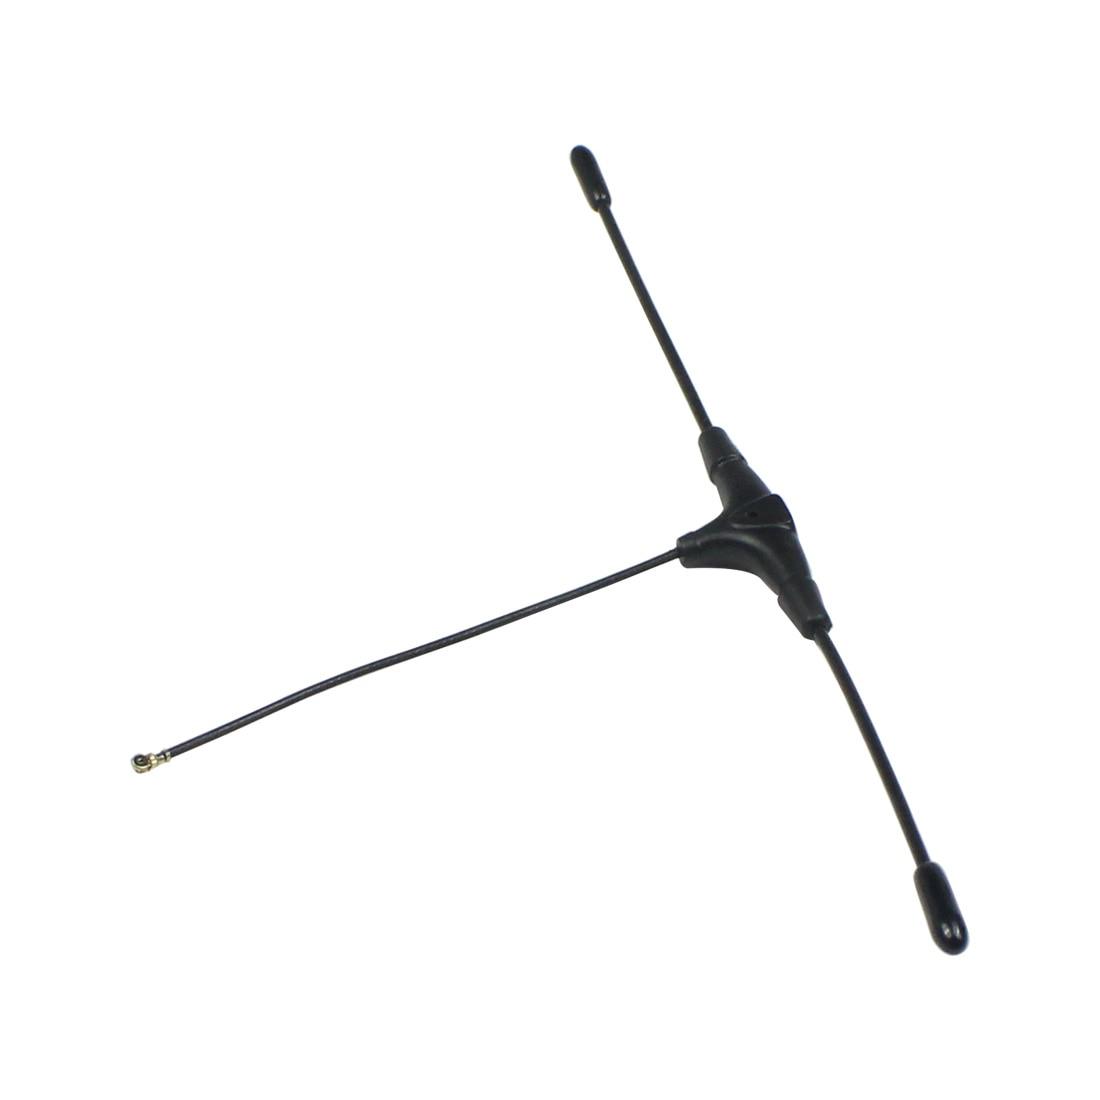 FEICHAO T-type Antenna 80mm 915MHZ /2.4G IPEX 4 IPEX4 IPEX1 for TBS CROSSFIRE Receiver /Frsky R9mm 900MHZ DIY FPV Racing Drone - RCDrone